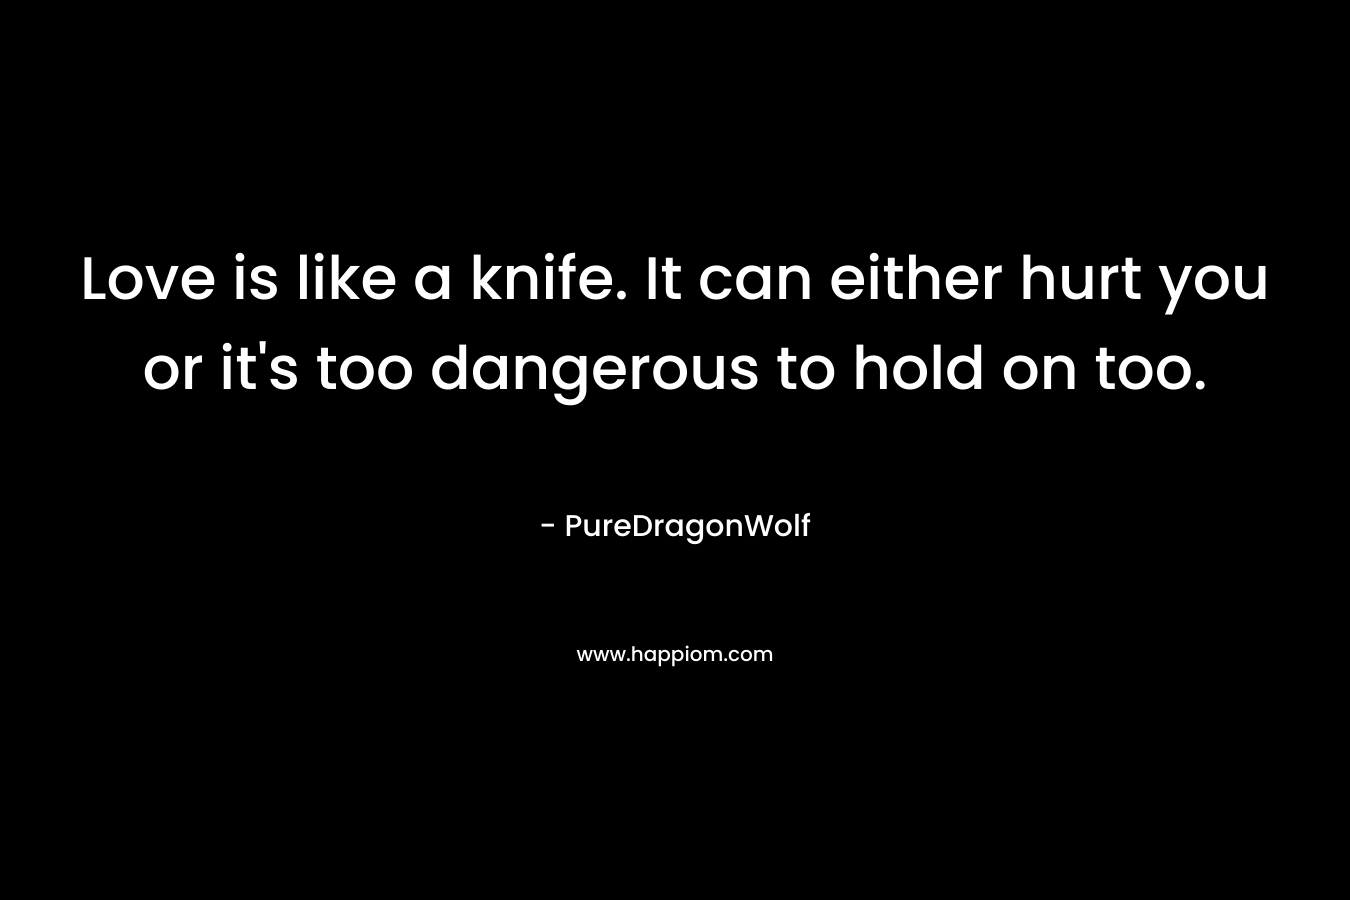 Love is like a knife. It can either hurt you or it’s too dangerous to hold on too. – PureDragonWolf